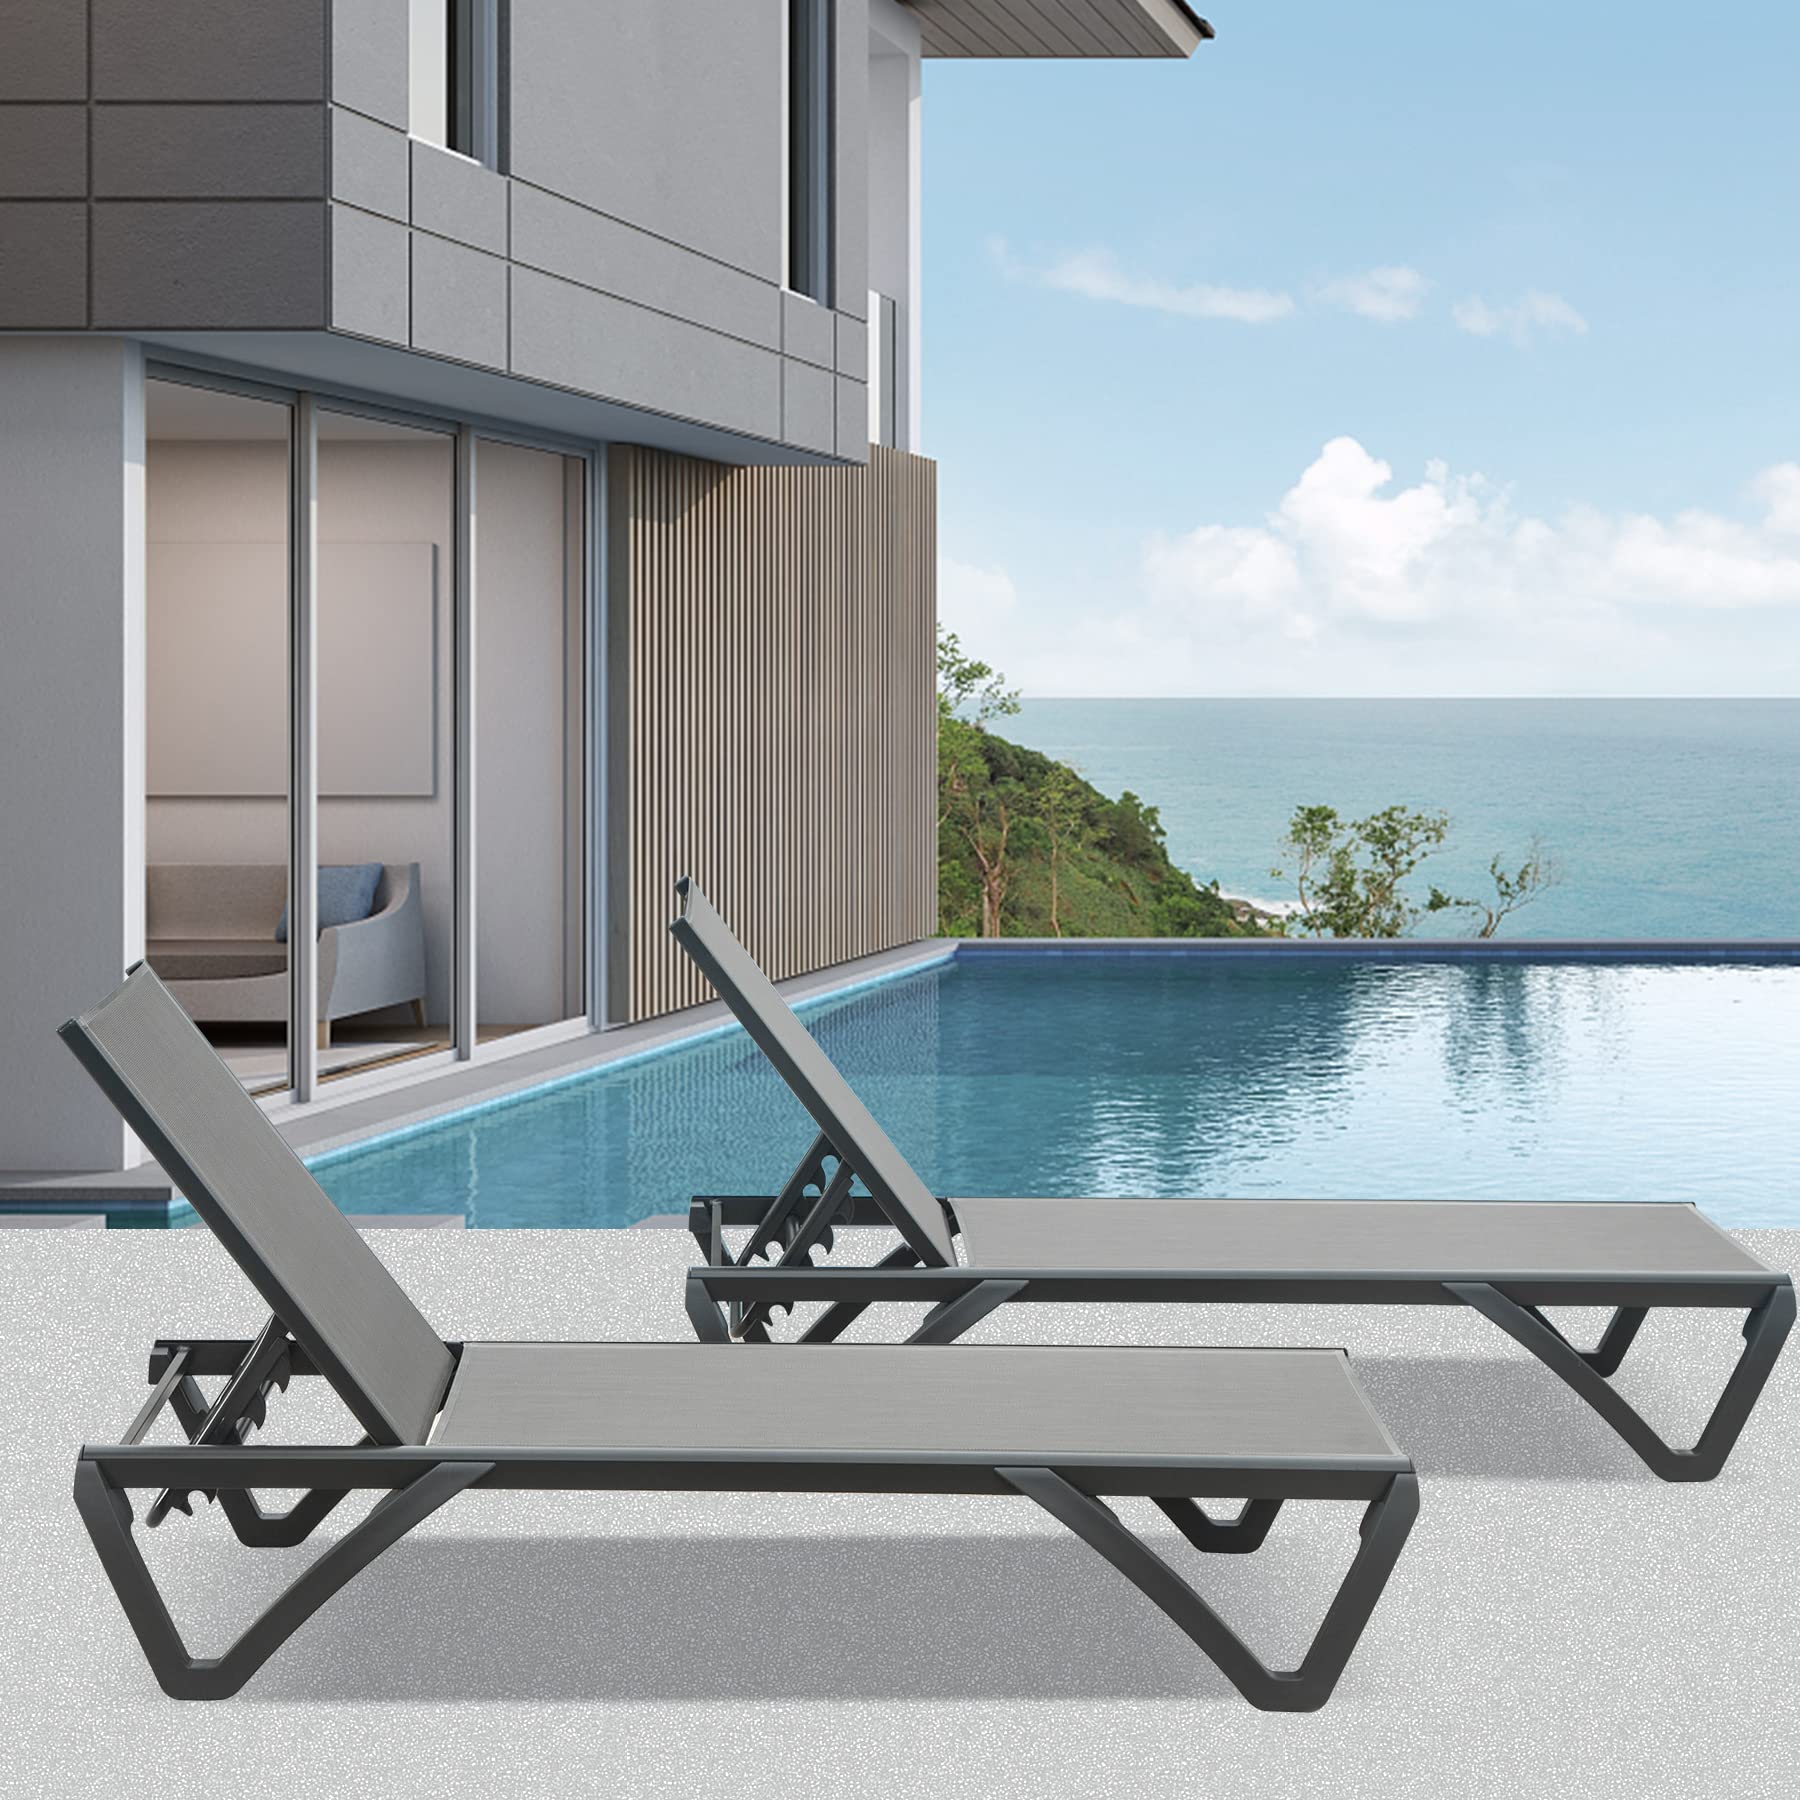 Domi Patio Chaise Lounge Outdoor Aluminum Polypropylene Chair with Adjustable Backrest, Poolside Sunbathing Chair for Beach,Yard,Balcony